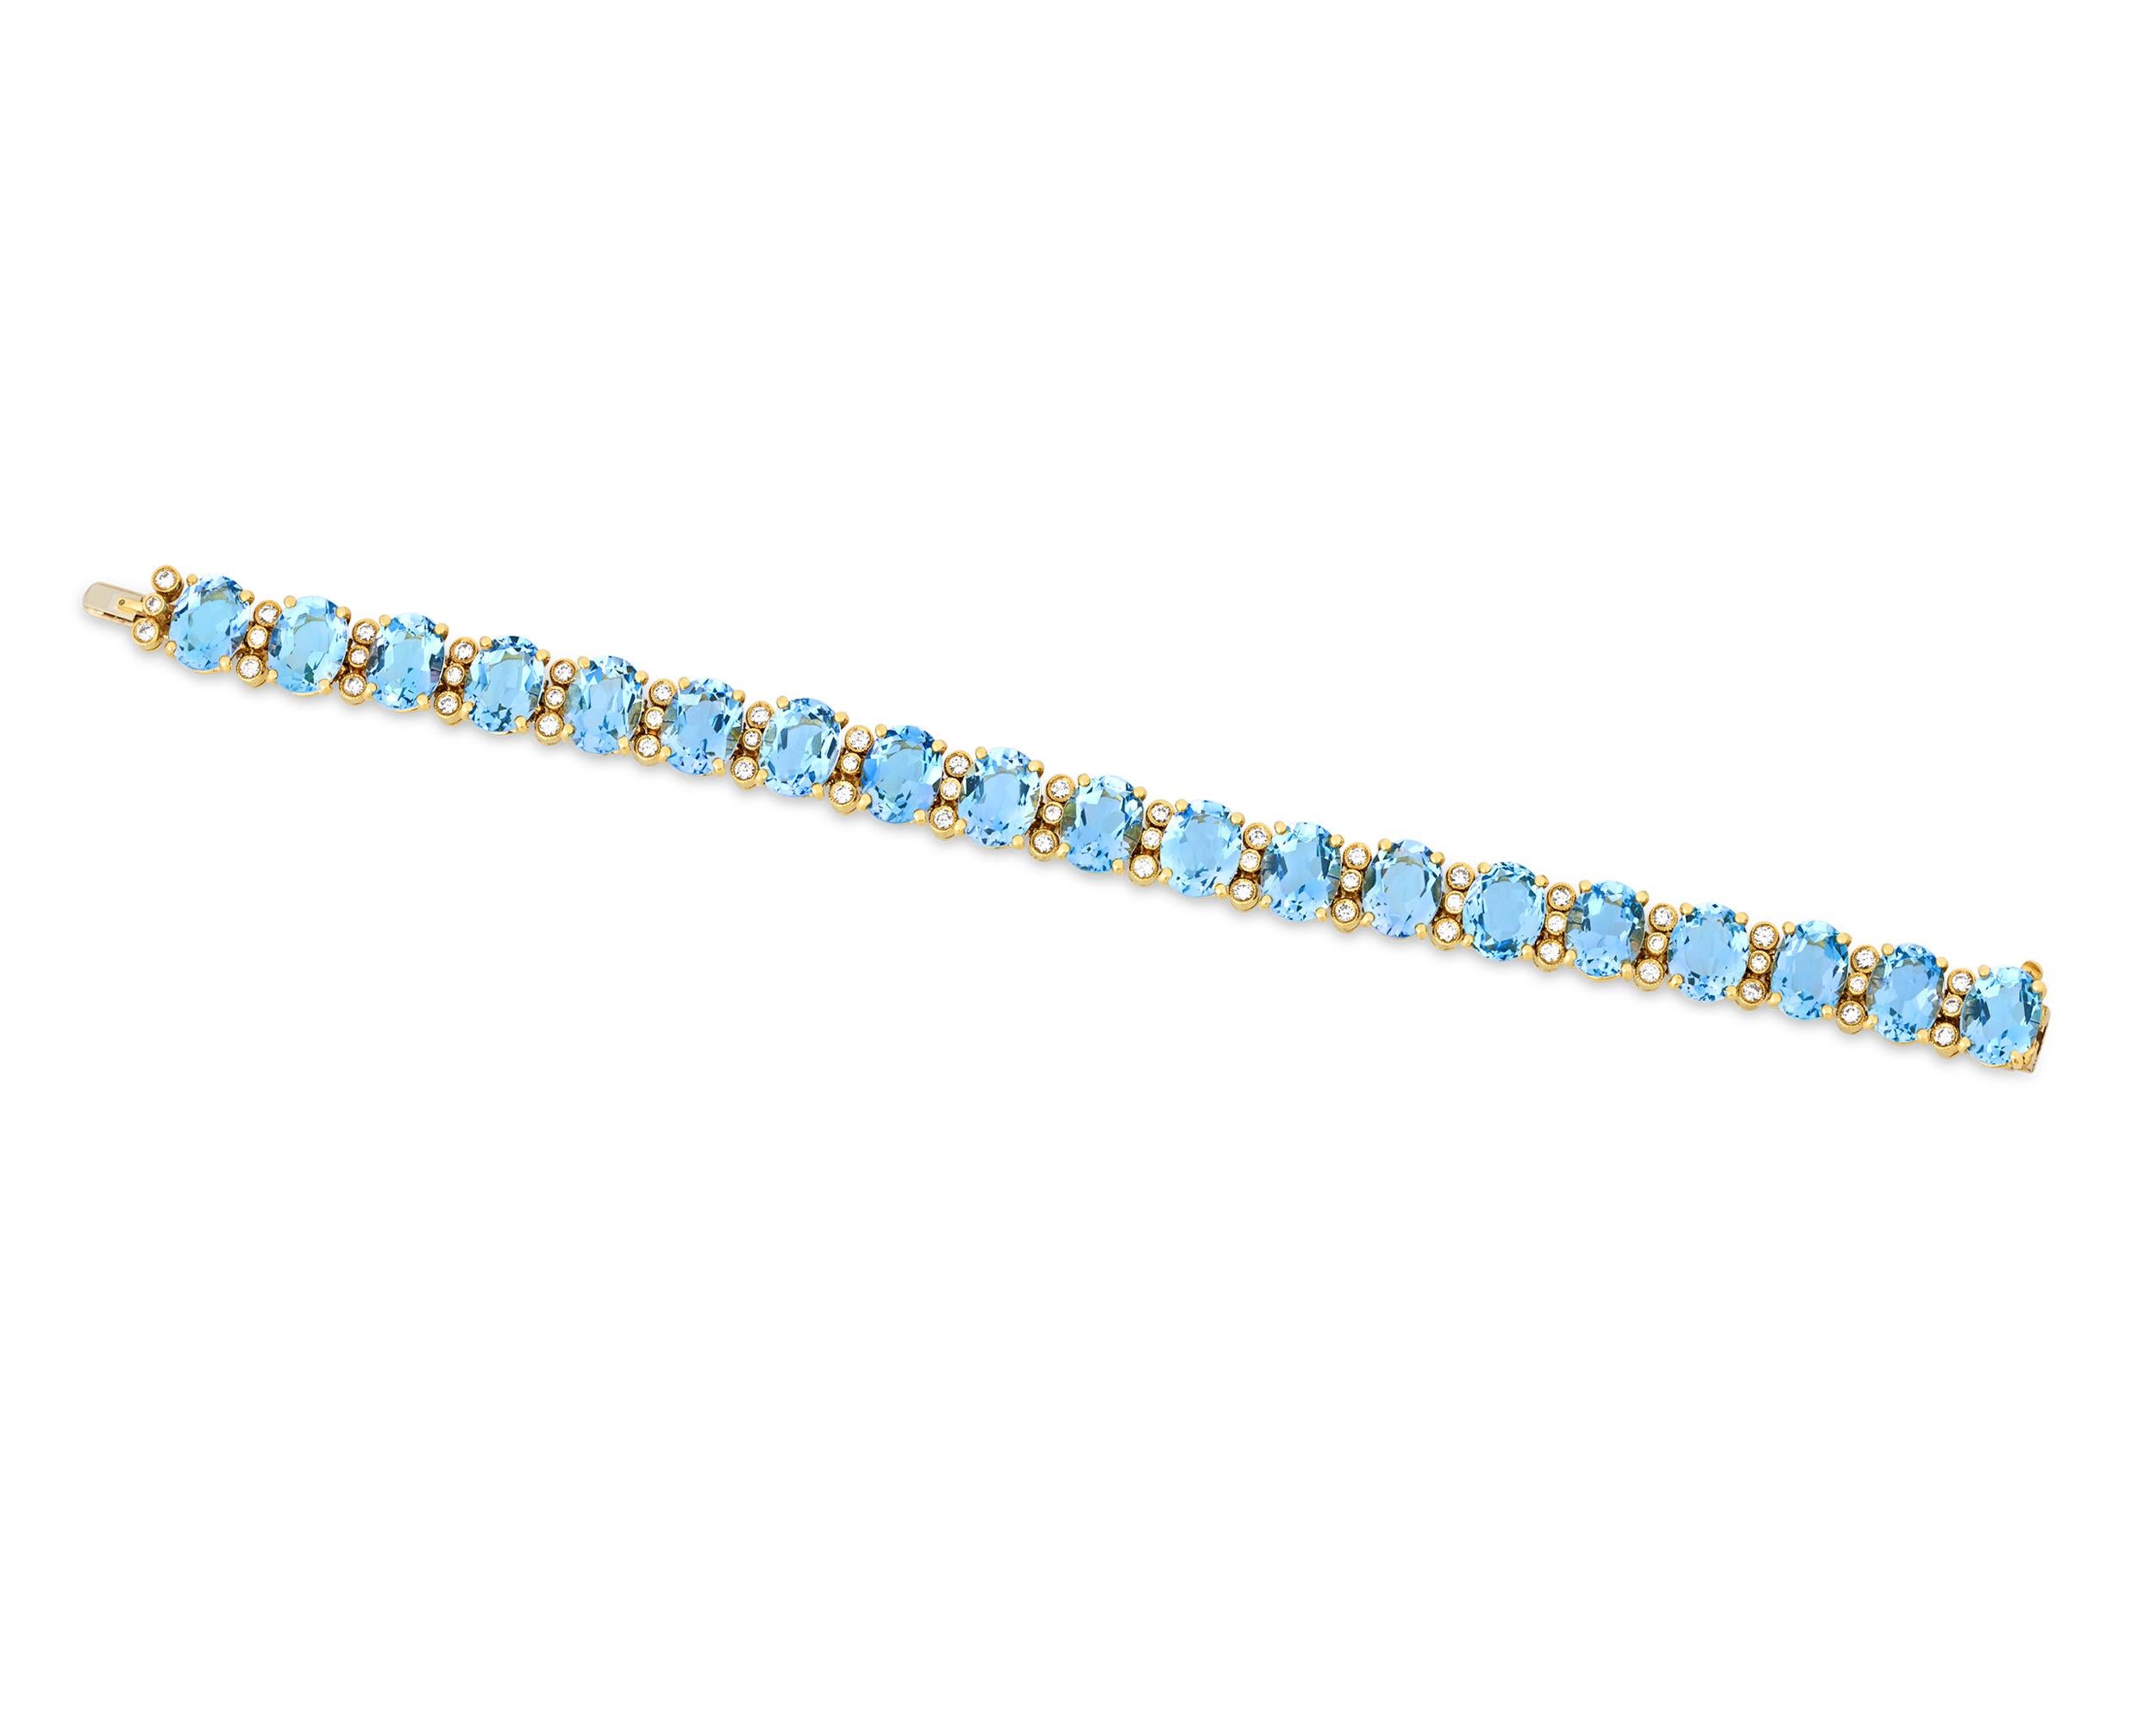 A dazzling sight to behold, this luminous aquamarine bracelet features 19 of exceptional blue gemstones arranged in a line. Totaling approximately 30.00 carats, the ocean-hued jewels are accented by sparkling white diamonds totaling approximately